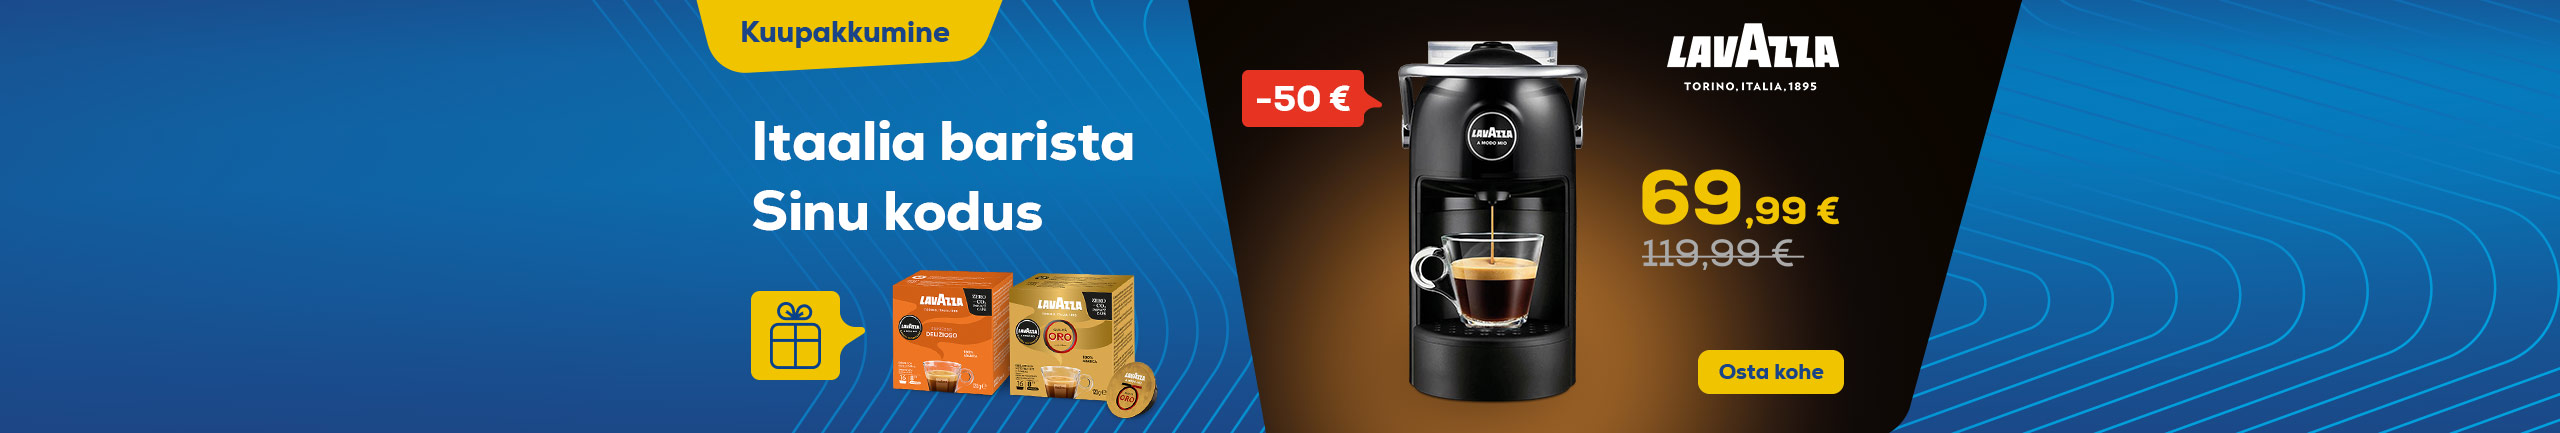 Buy Lavazza capsule machine and receive a complimentary gift